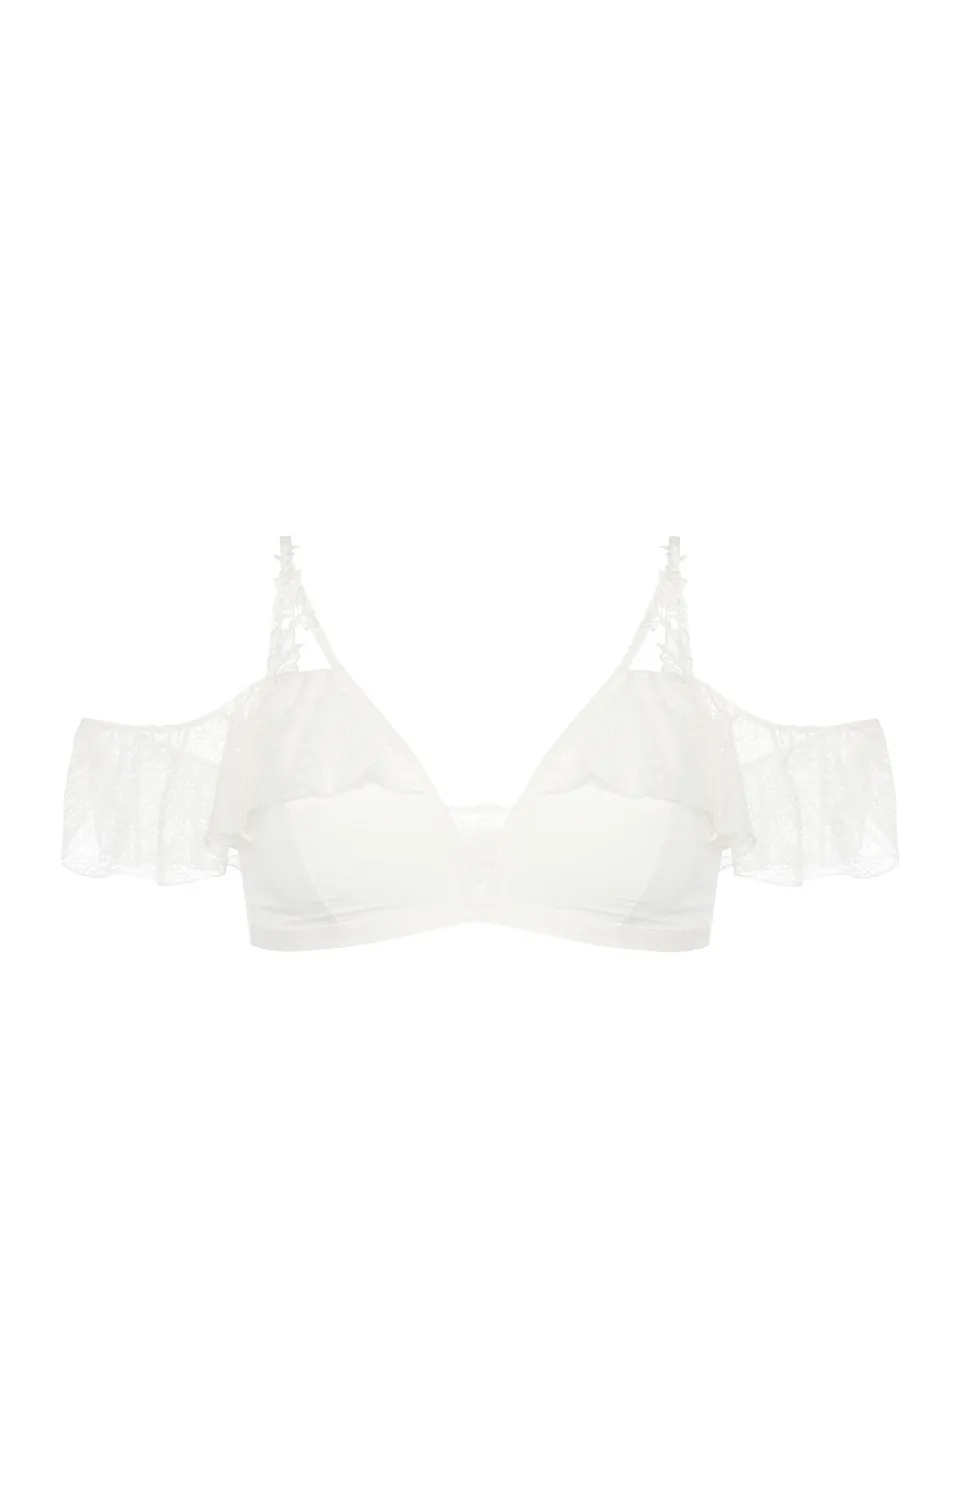 Primark Wedding Lingerie And Nightwear Collection: Everything Is Under £12  And Beyond Dreamy